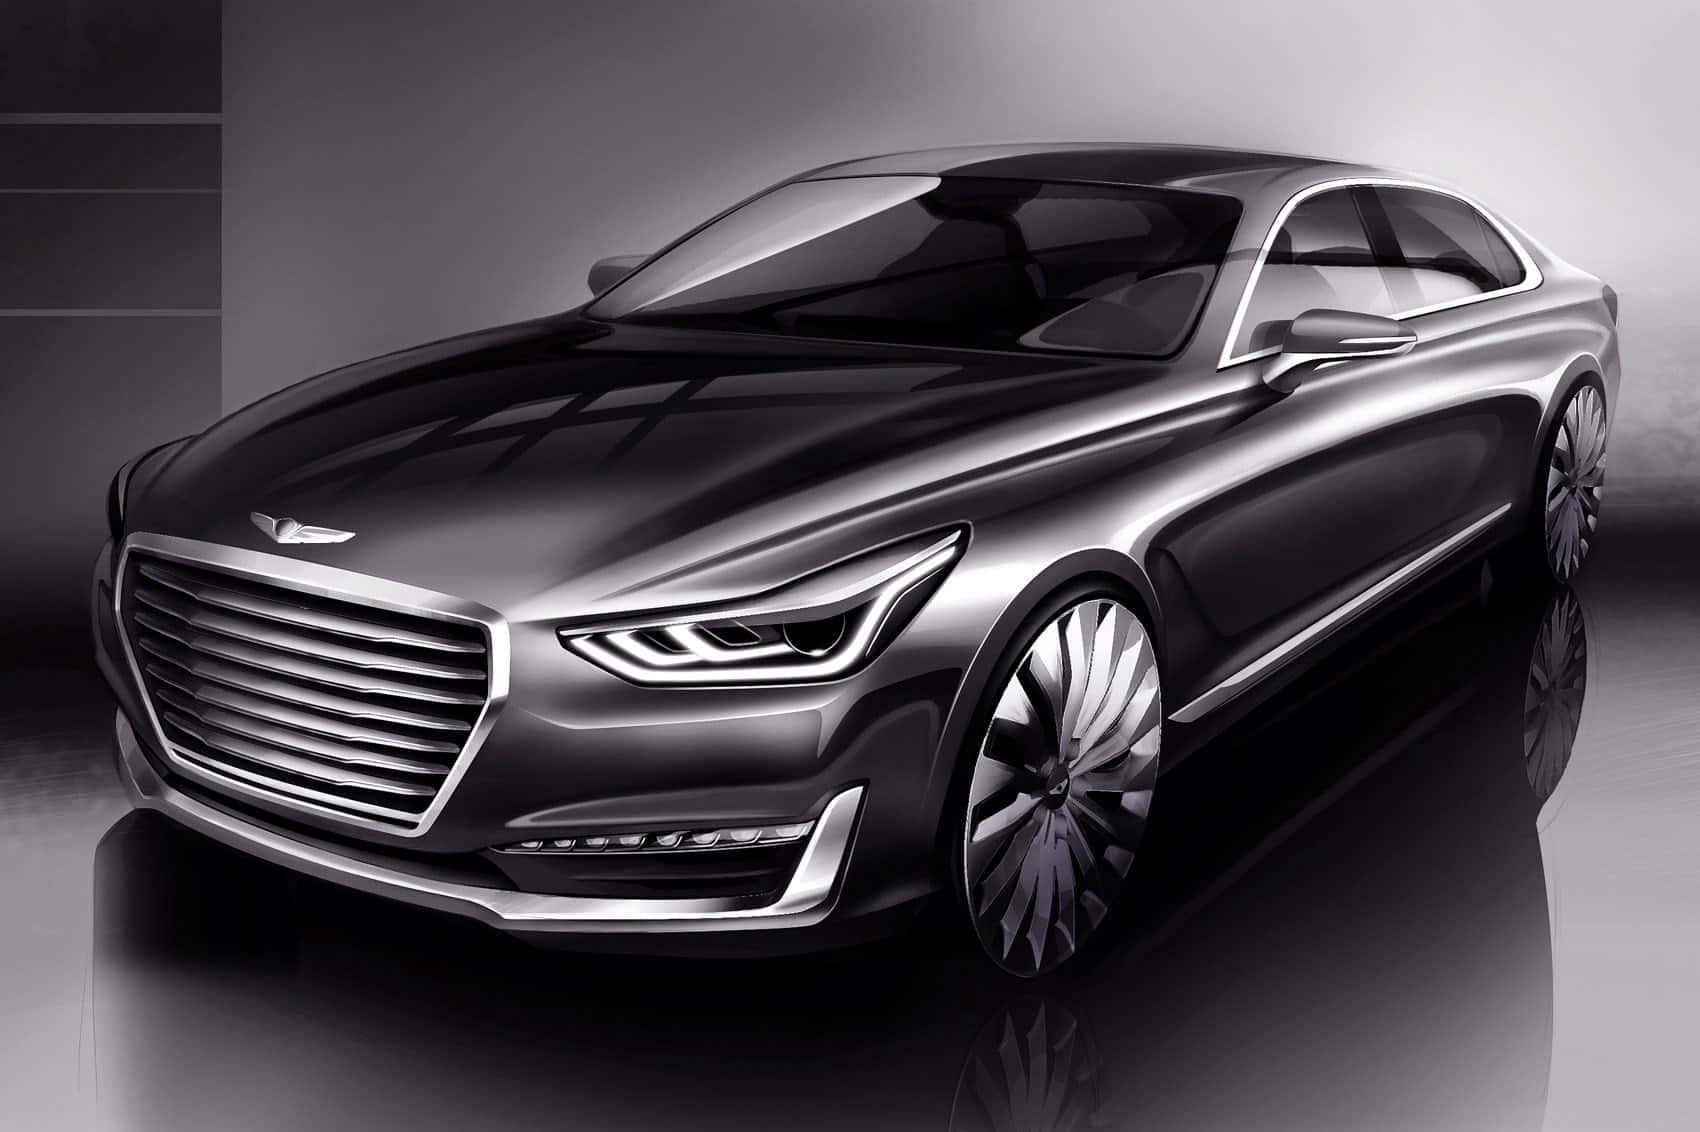 Enjoy luxury and refined performance with Genesis